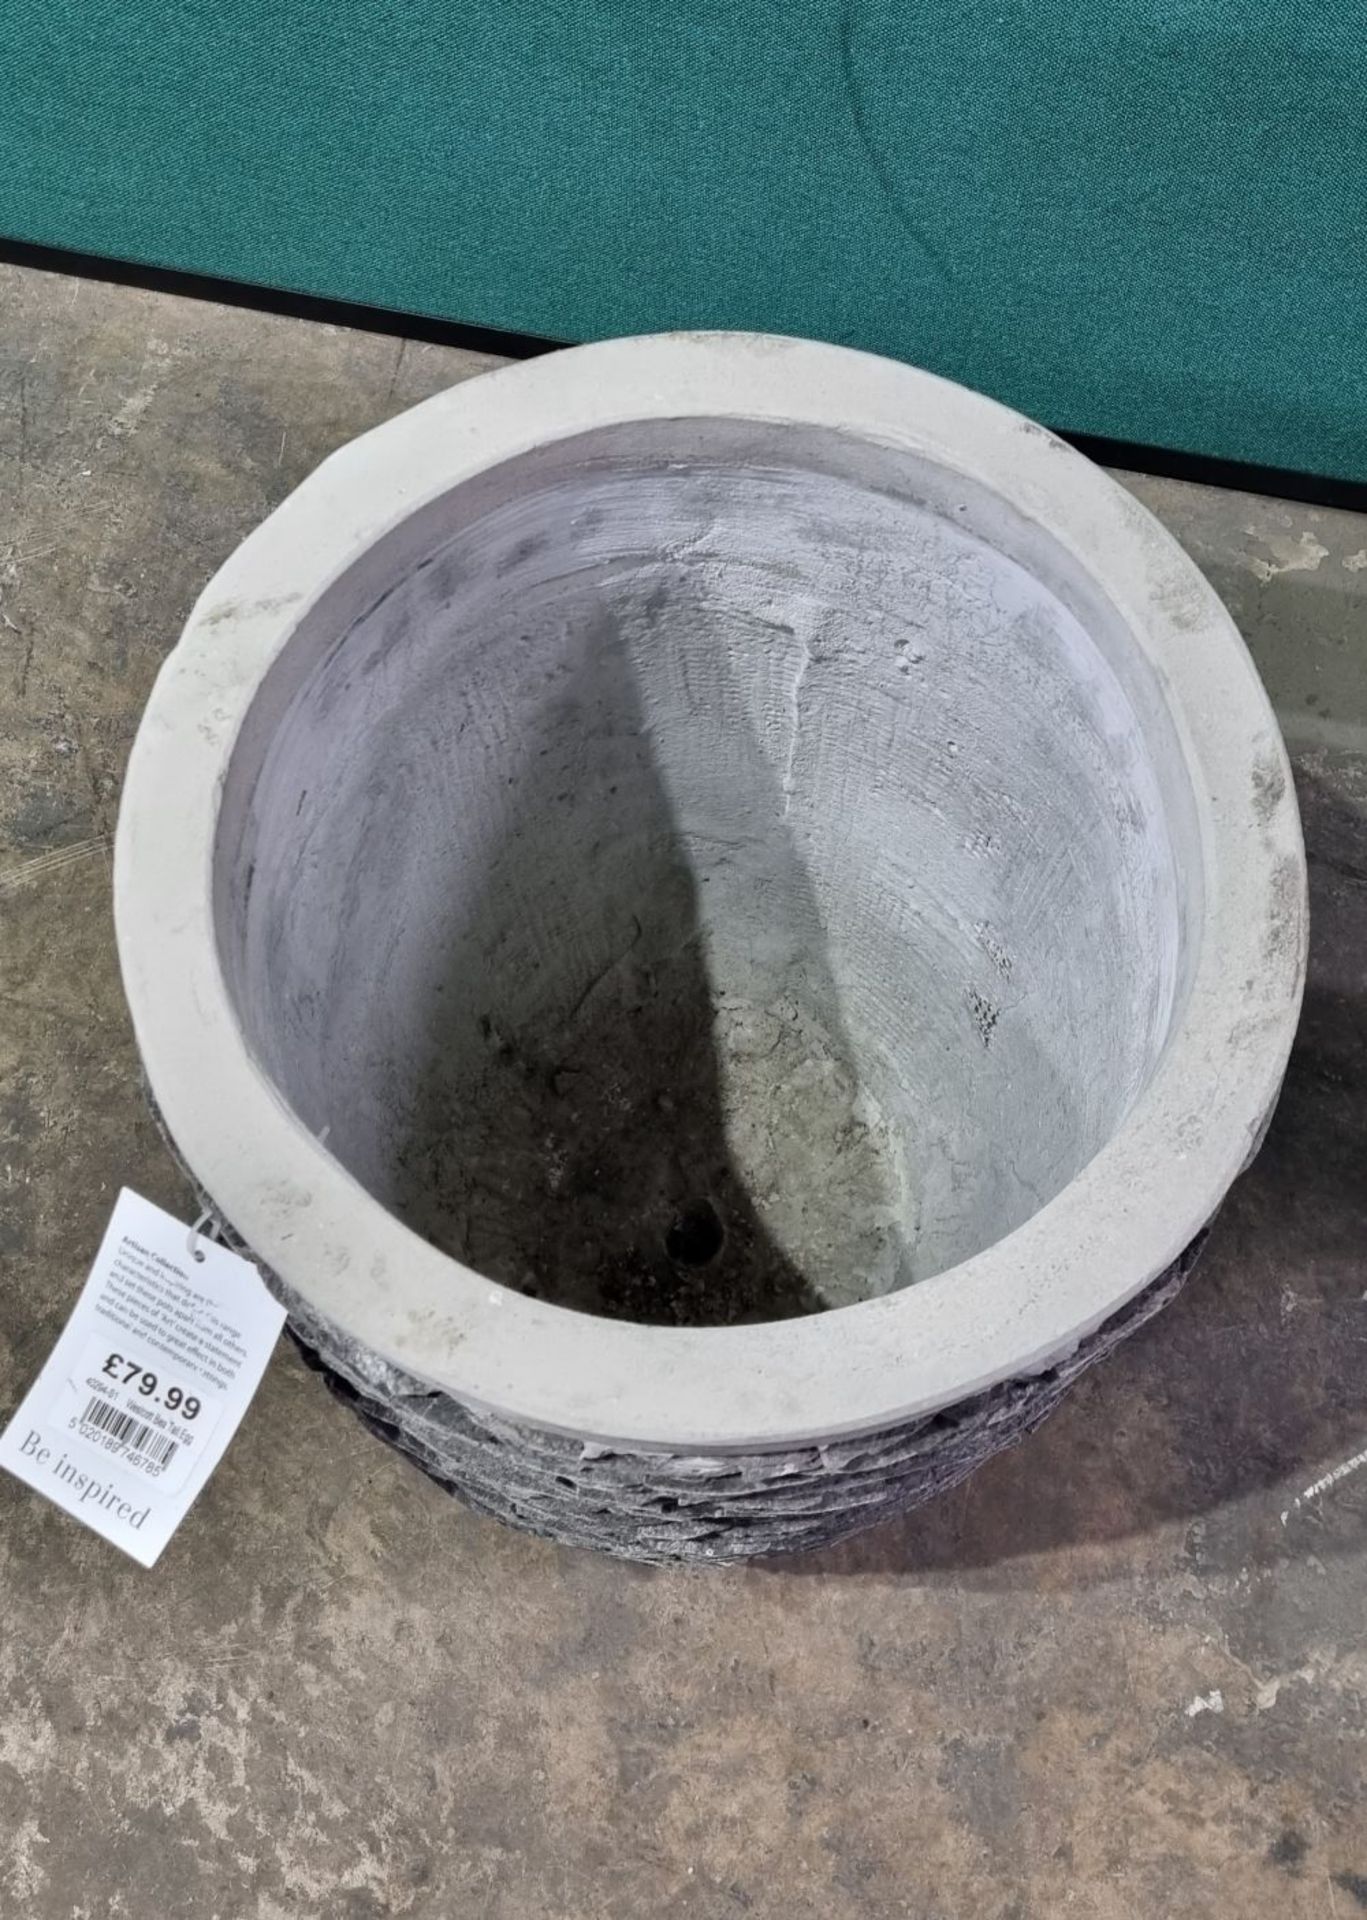 Mims Artisan Collection Westcott BEA 40294-S1 Tall Slate Egg Planter | 550mm x 350mm | RRP £79.99 - Image 4 of 5